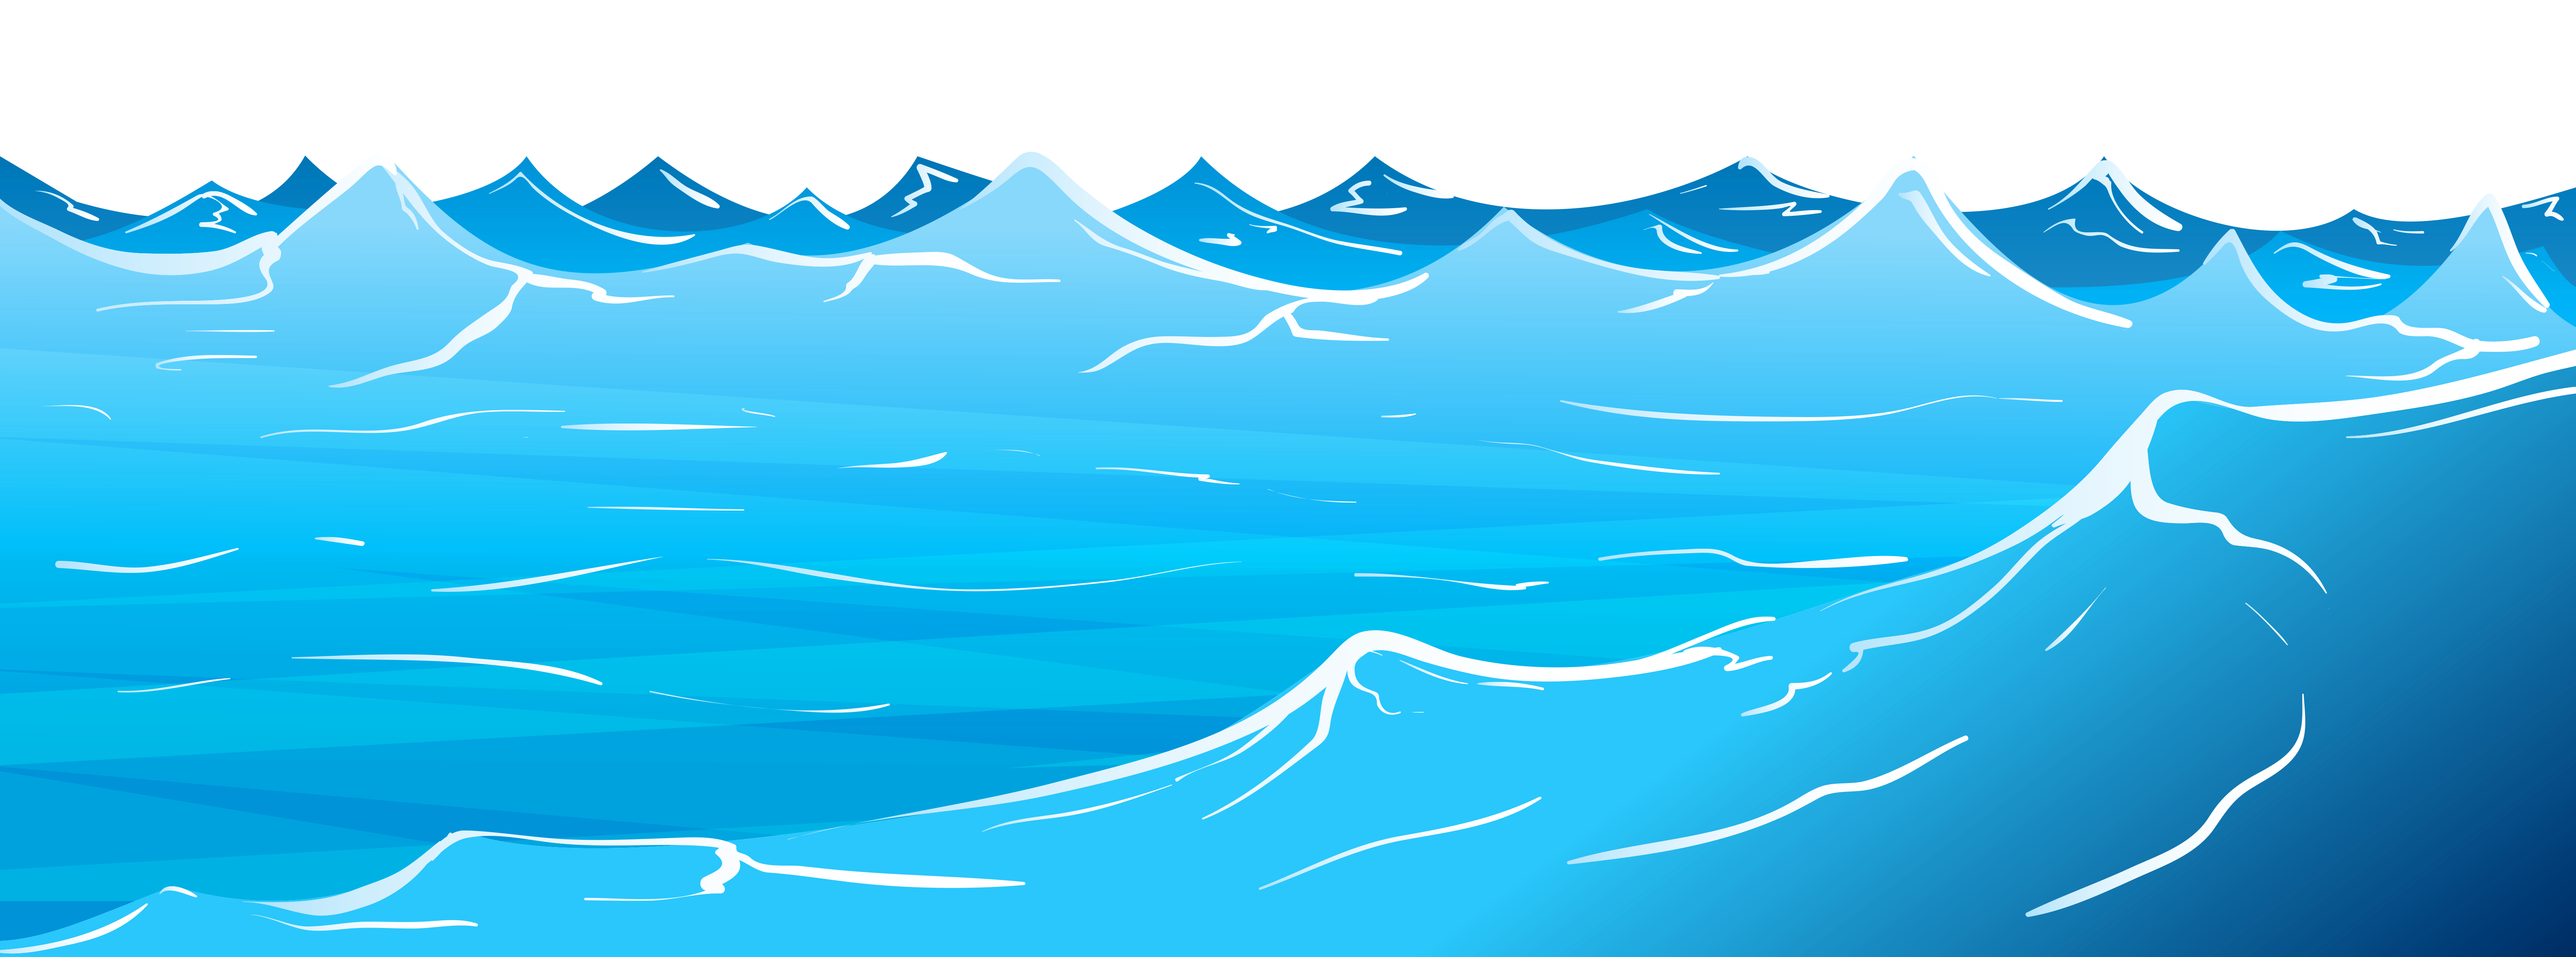 Waves wave clipart 5